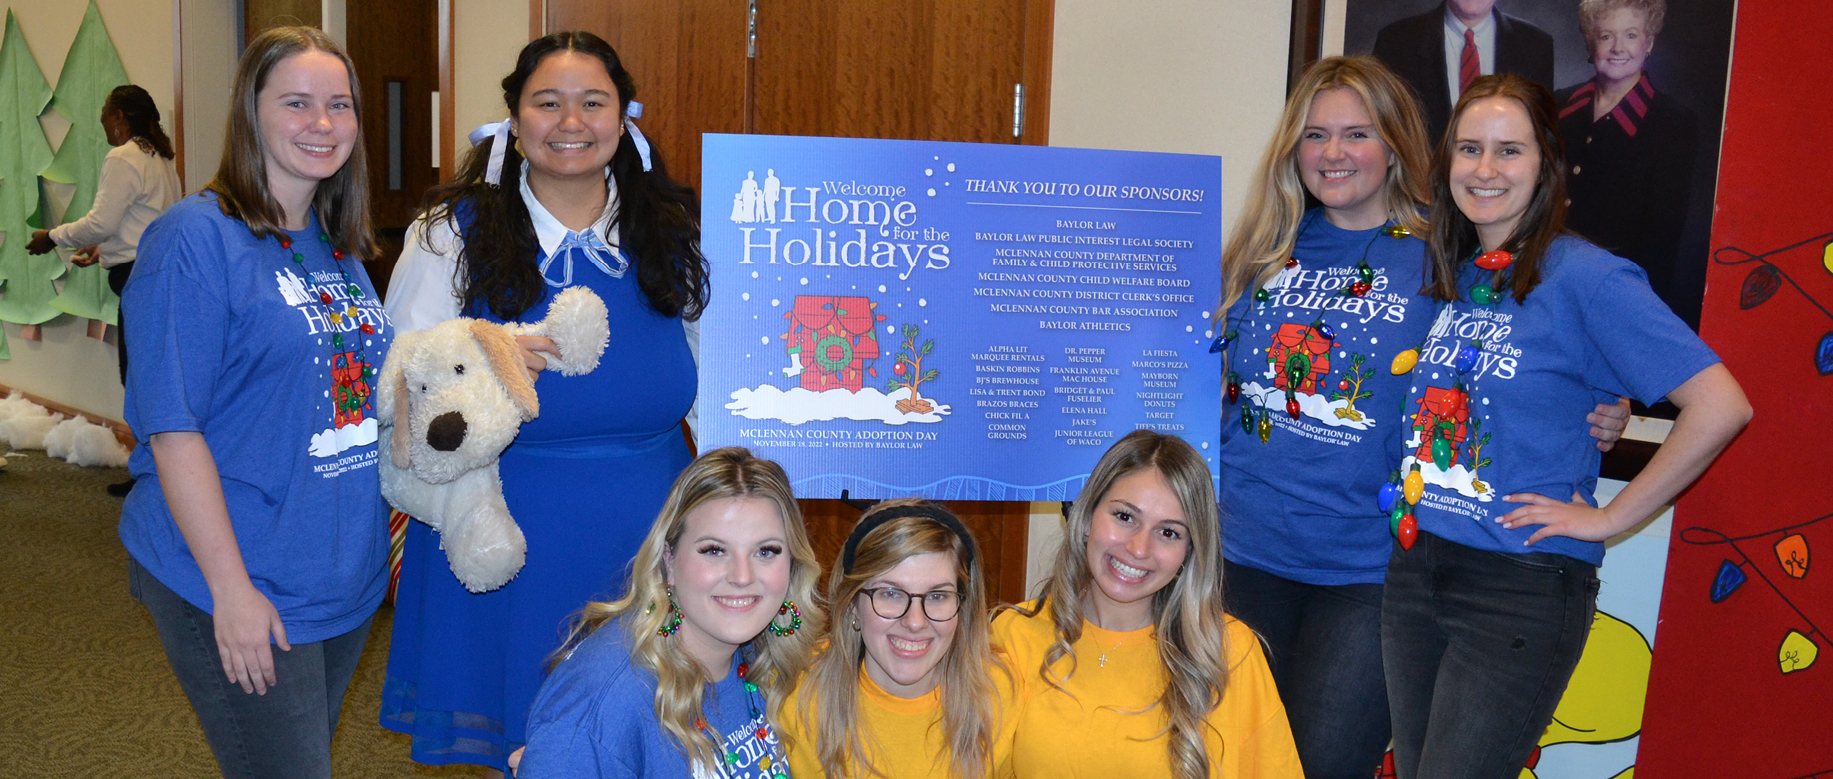 Baylor Law Students - Holding Snoopy-themed items or wearing Charlie Brown t-shirts, pose with a sign from Adoption Day 2022